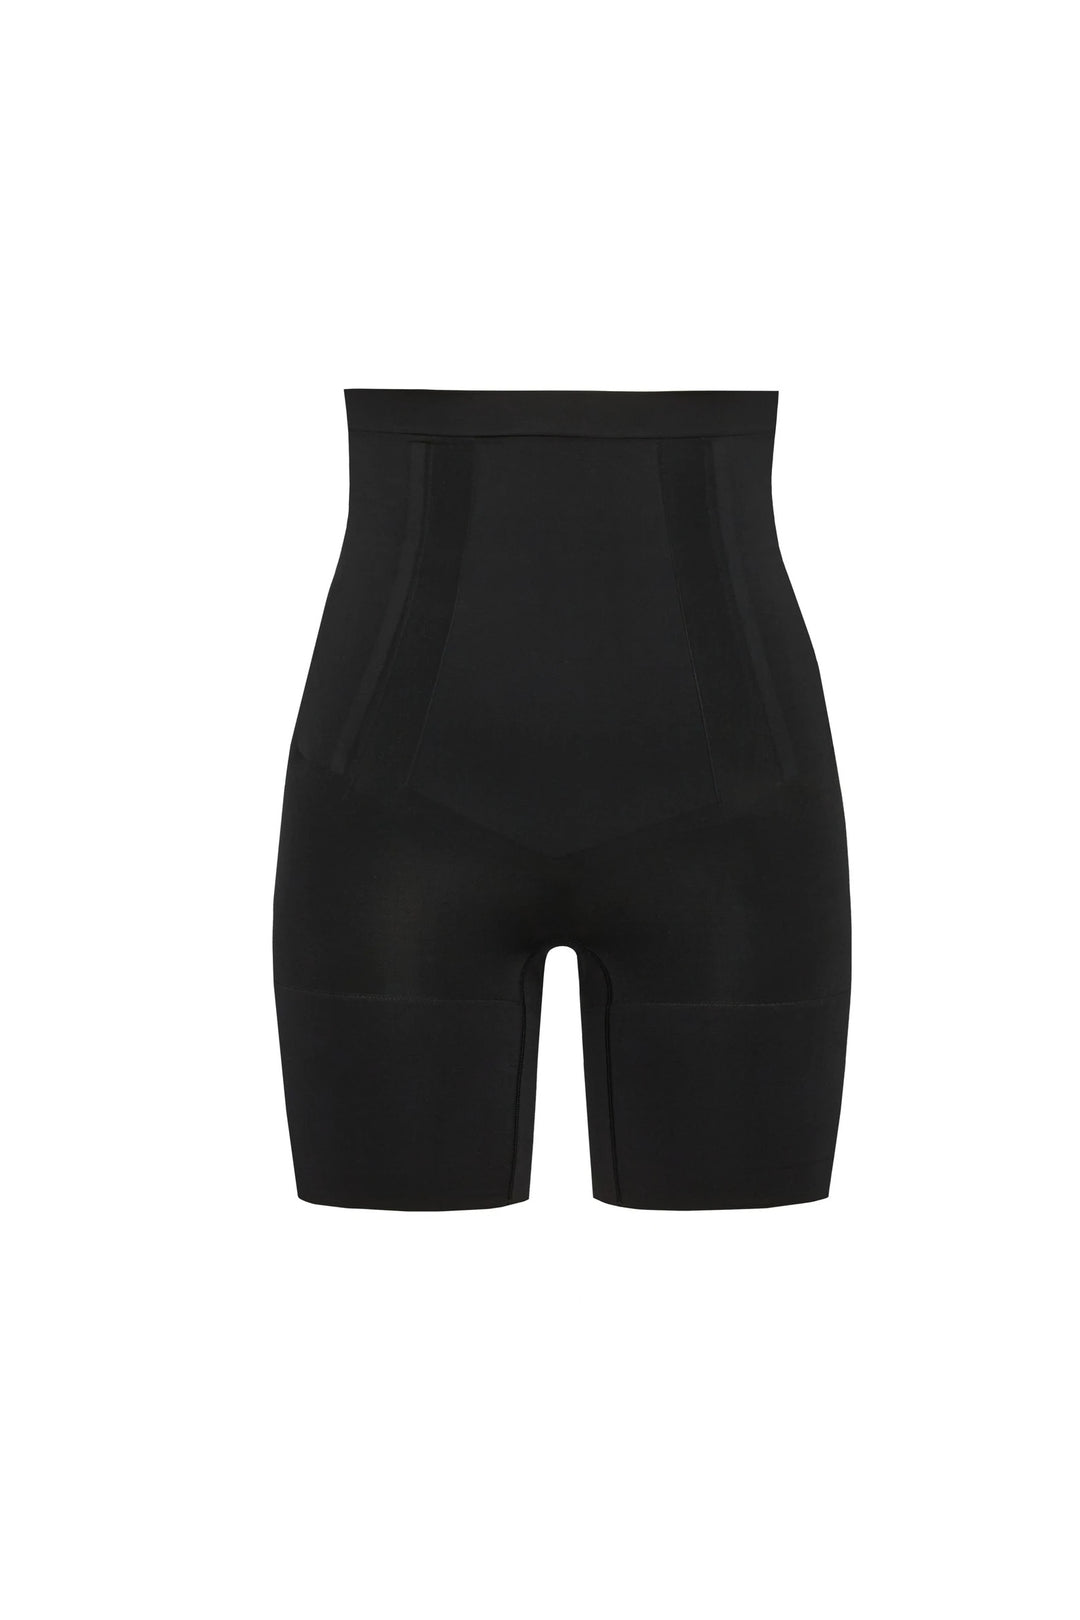 Oncore High-Waisted Mid-Thigh Shaper Short